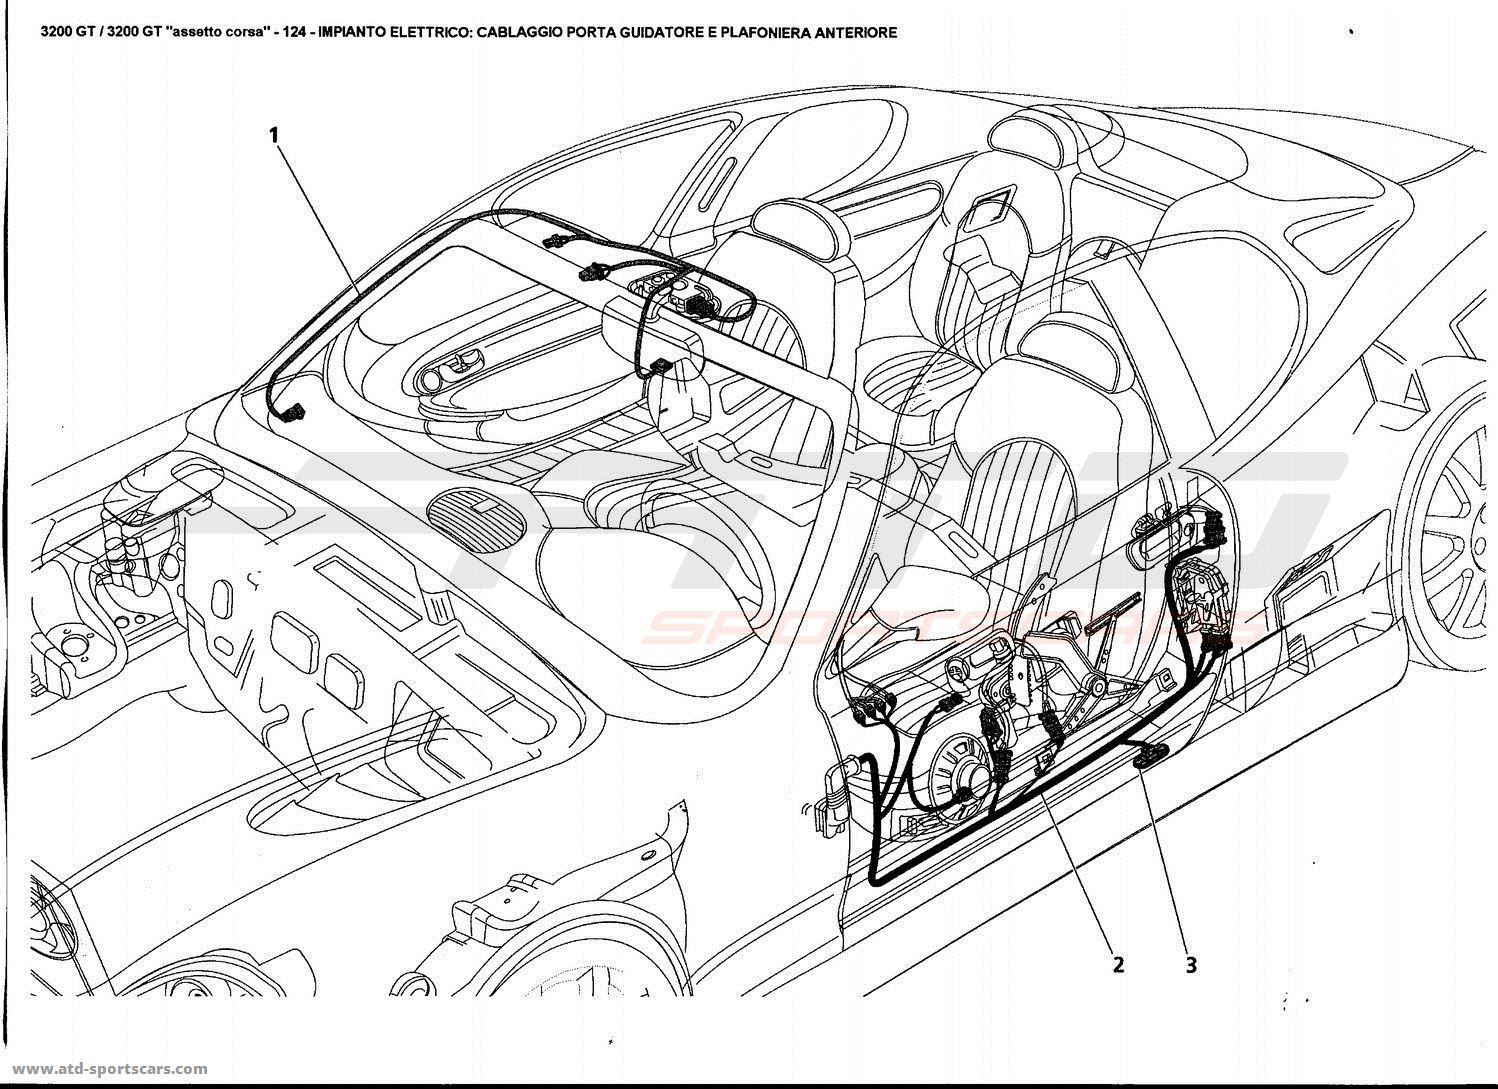 ELECTRICAL SYSTEM: DRIVER'S DOOR AND FRONT CEILING LIGHT HARNESS